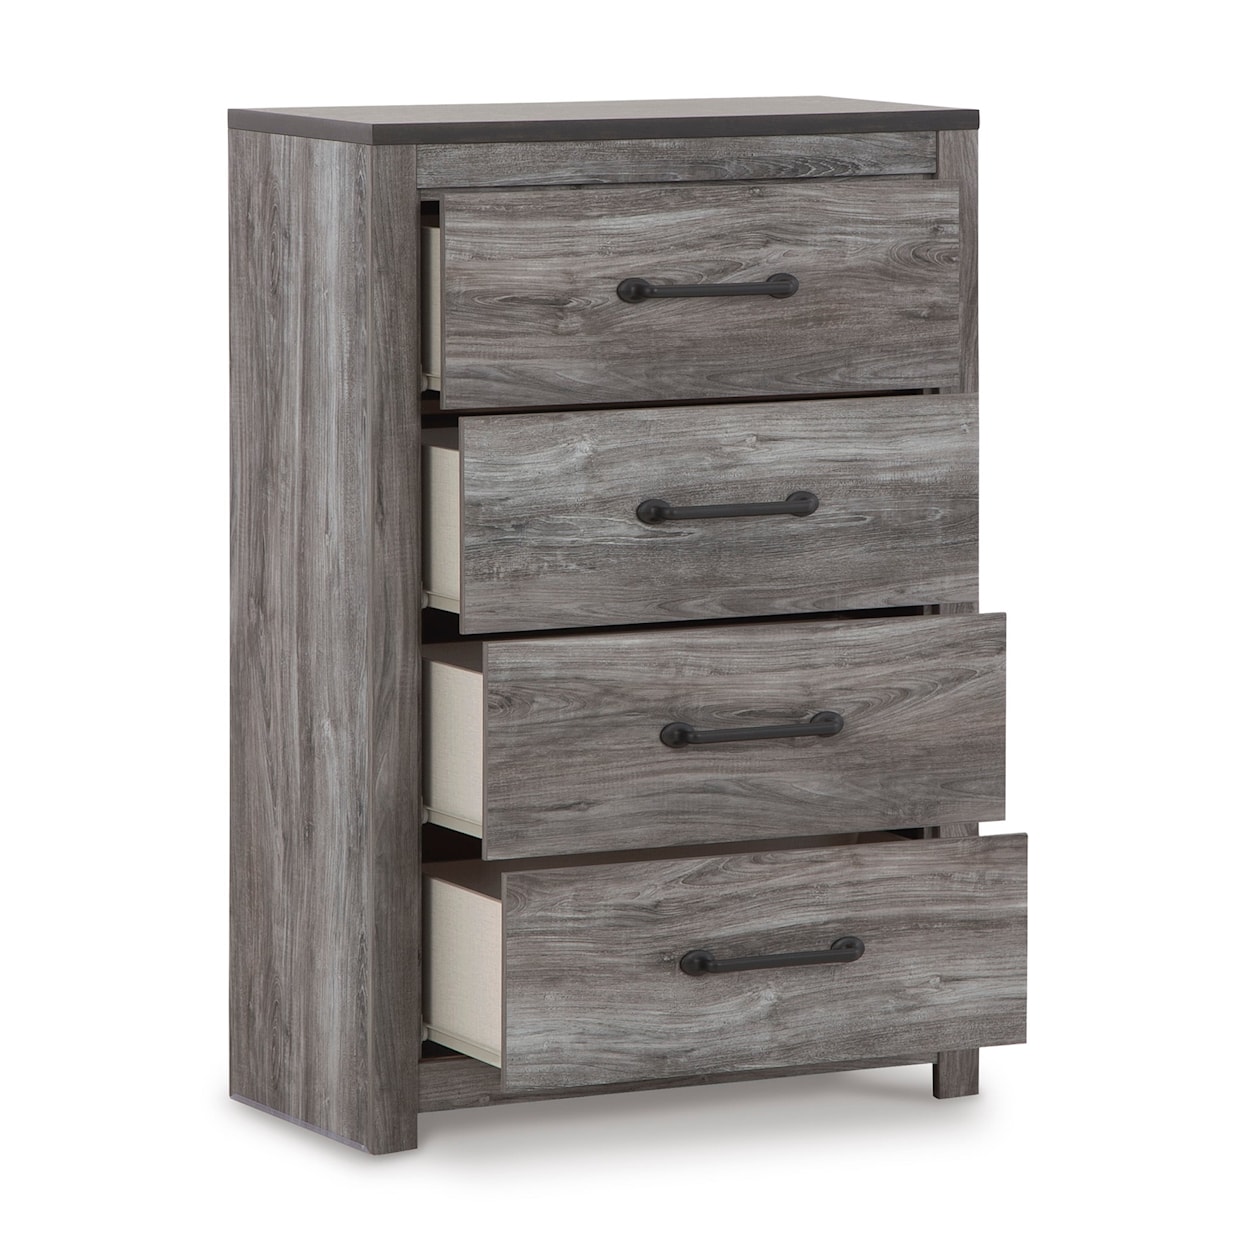 Signature Design by Ashley Bronyan Chest of Drawers